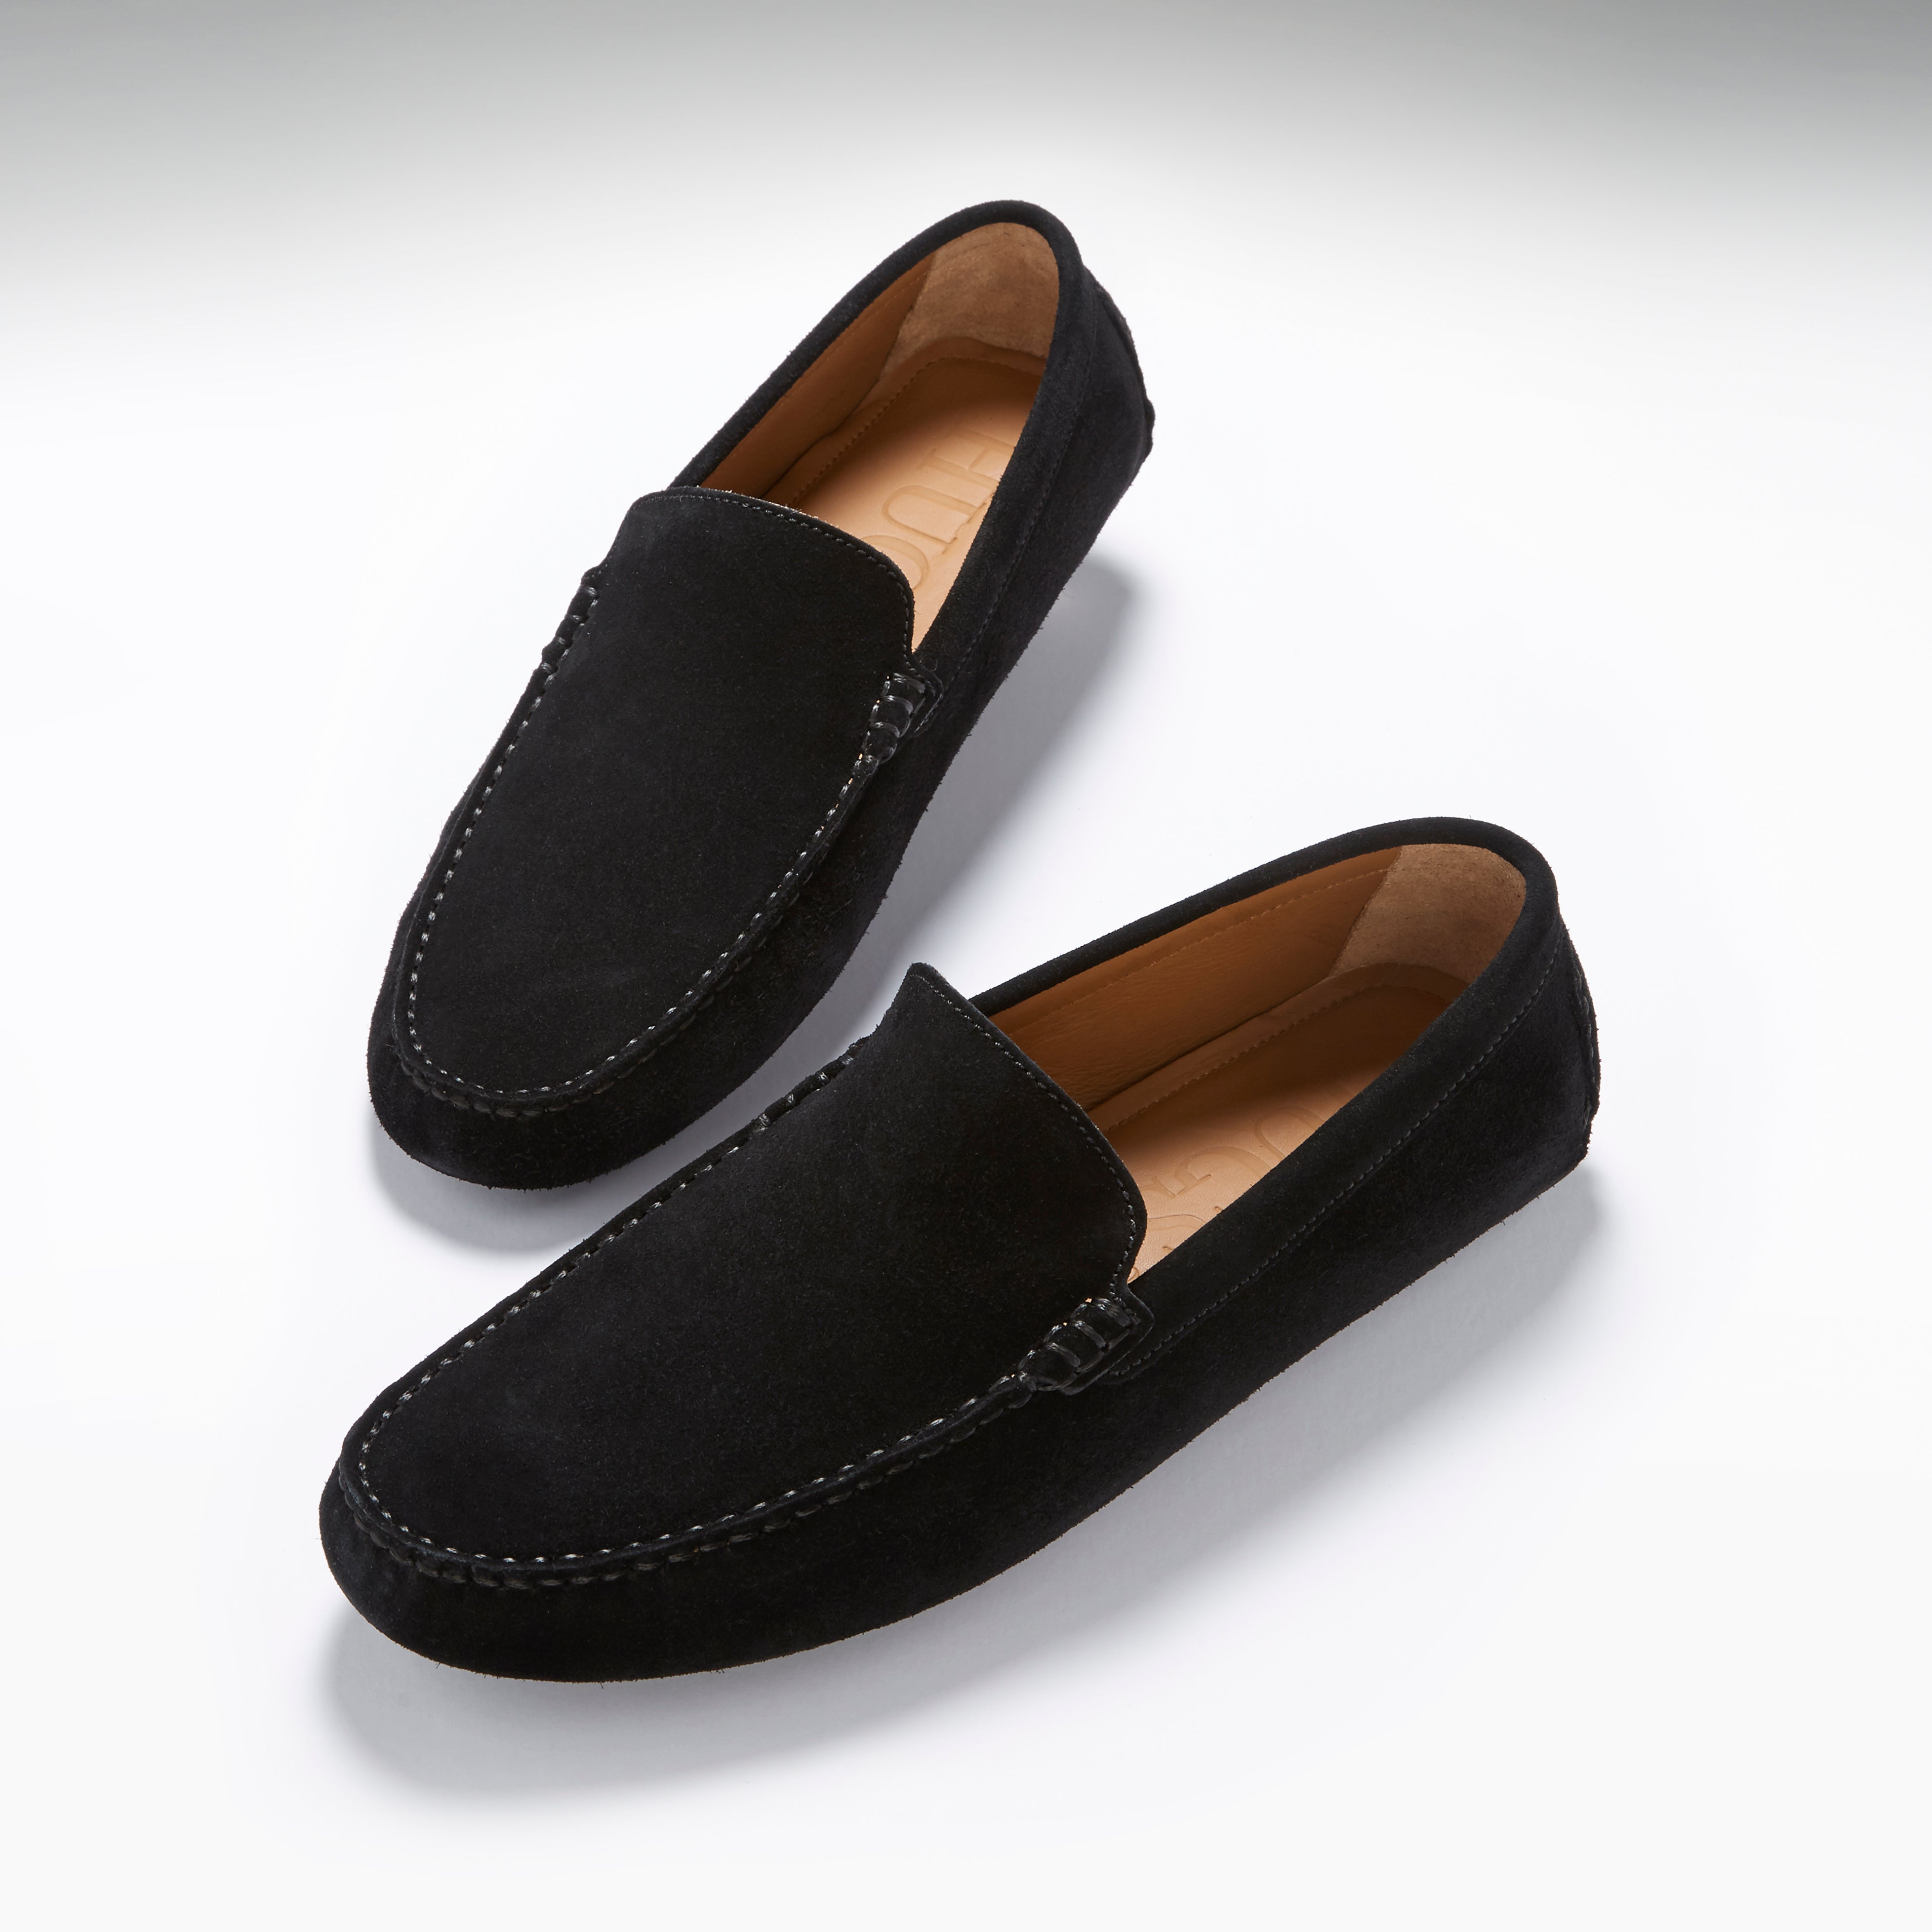 Driving Loafers, black suede - Hugs & Co.